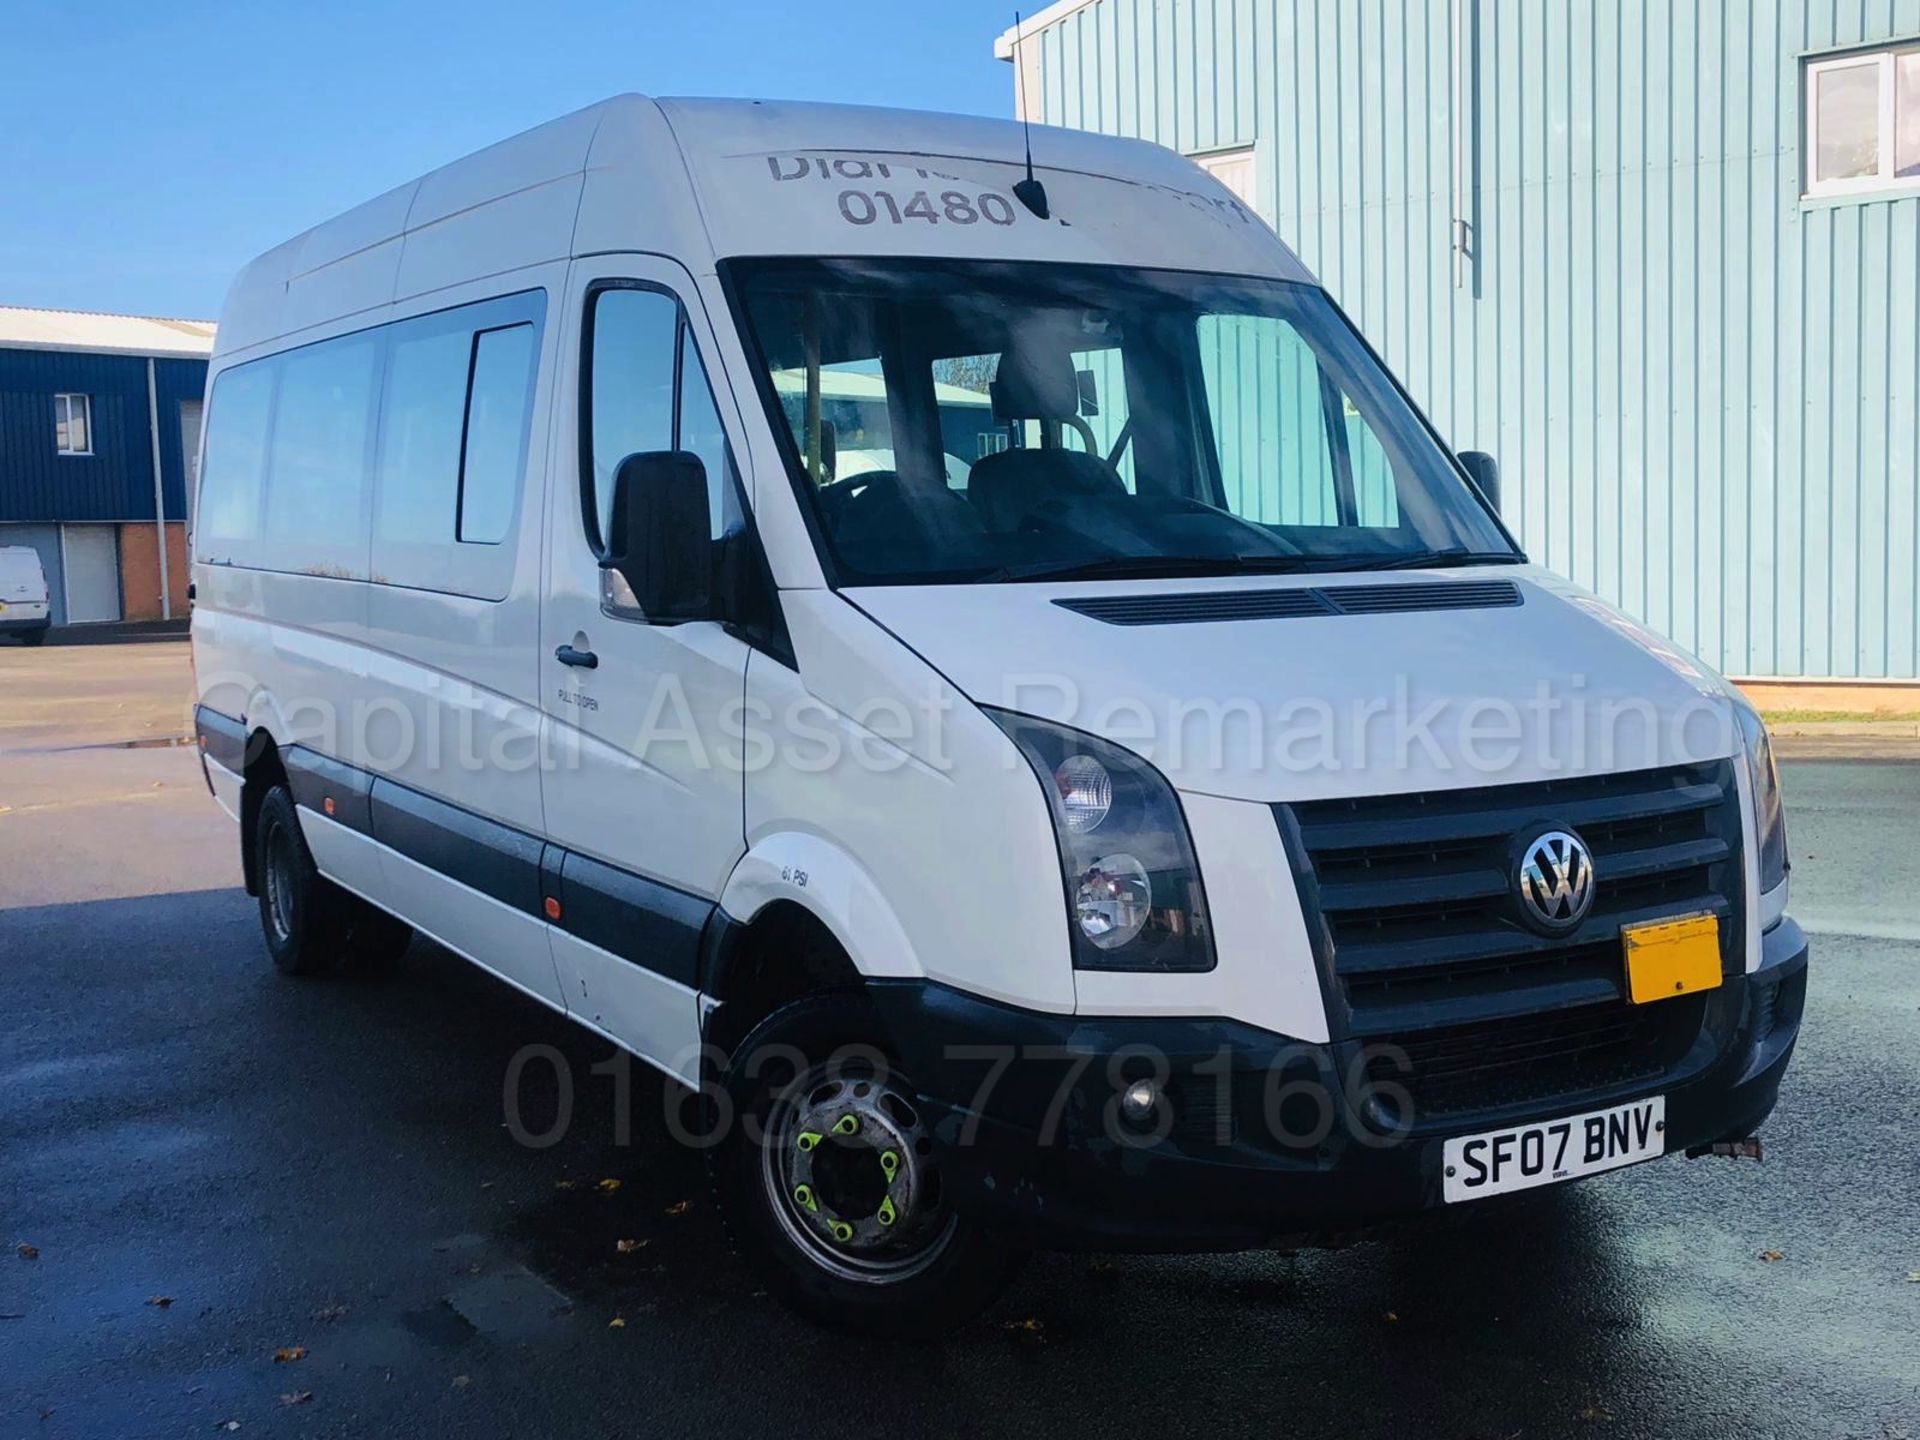 VOLKSWAGEN CRAFTER 2.5 TDI *LWB - 16 SEATER MINI-BUS / COACH* (2007) *ELECTRIC WHEEL CHAIR LIFT* - Image 3 of 38